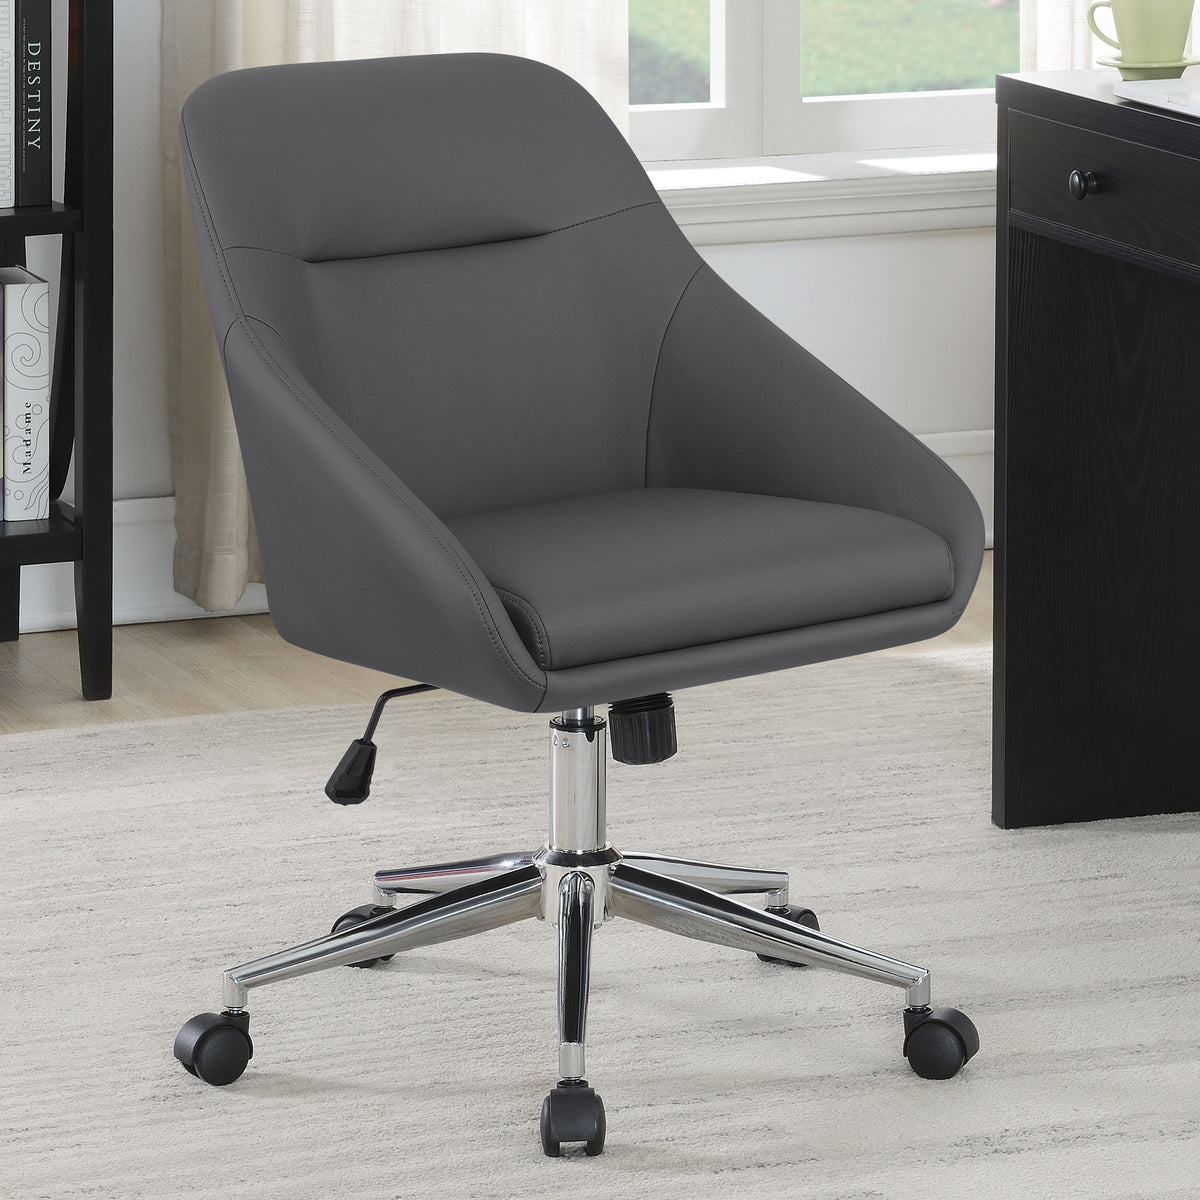 Jackman Upholstered Office Chair with Casters  Half Price Furniture